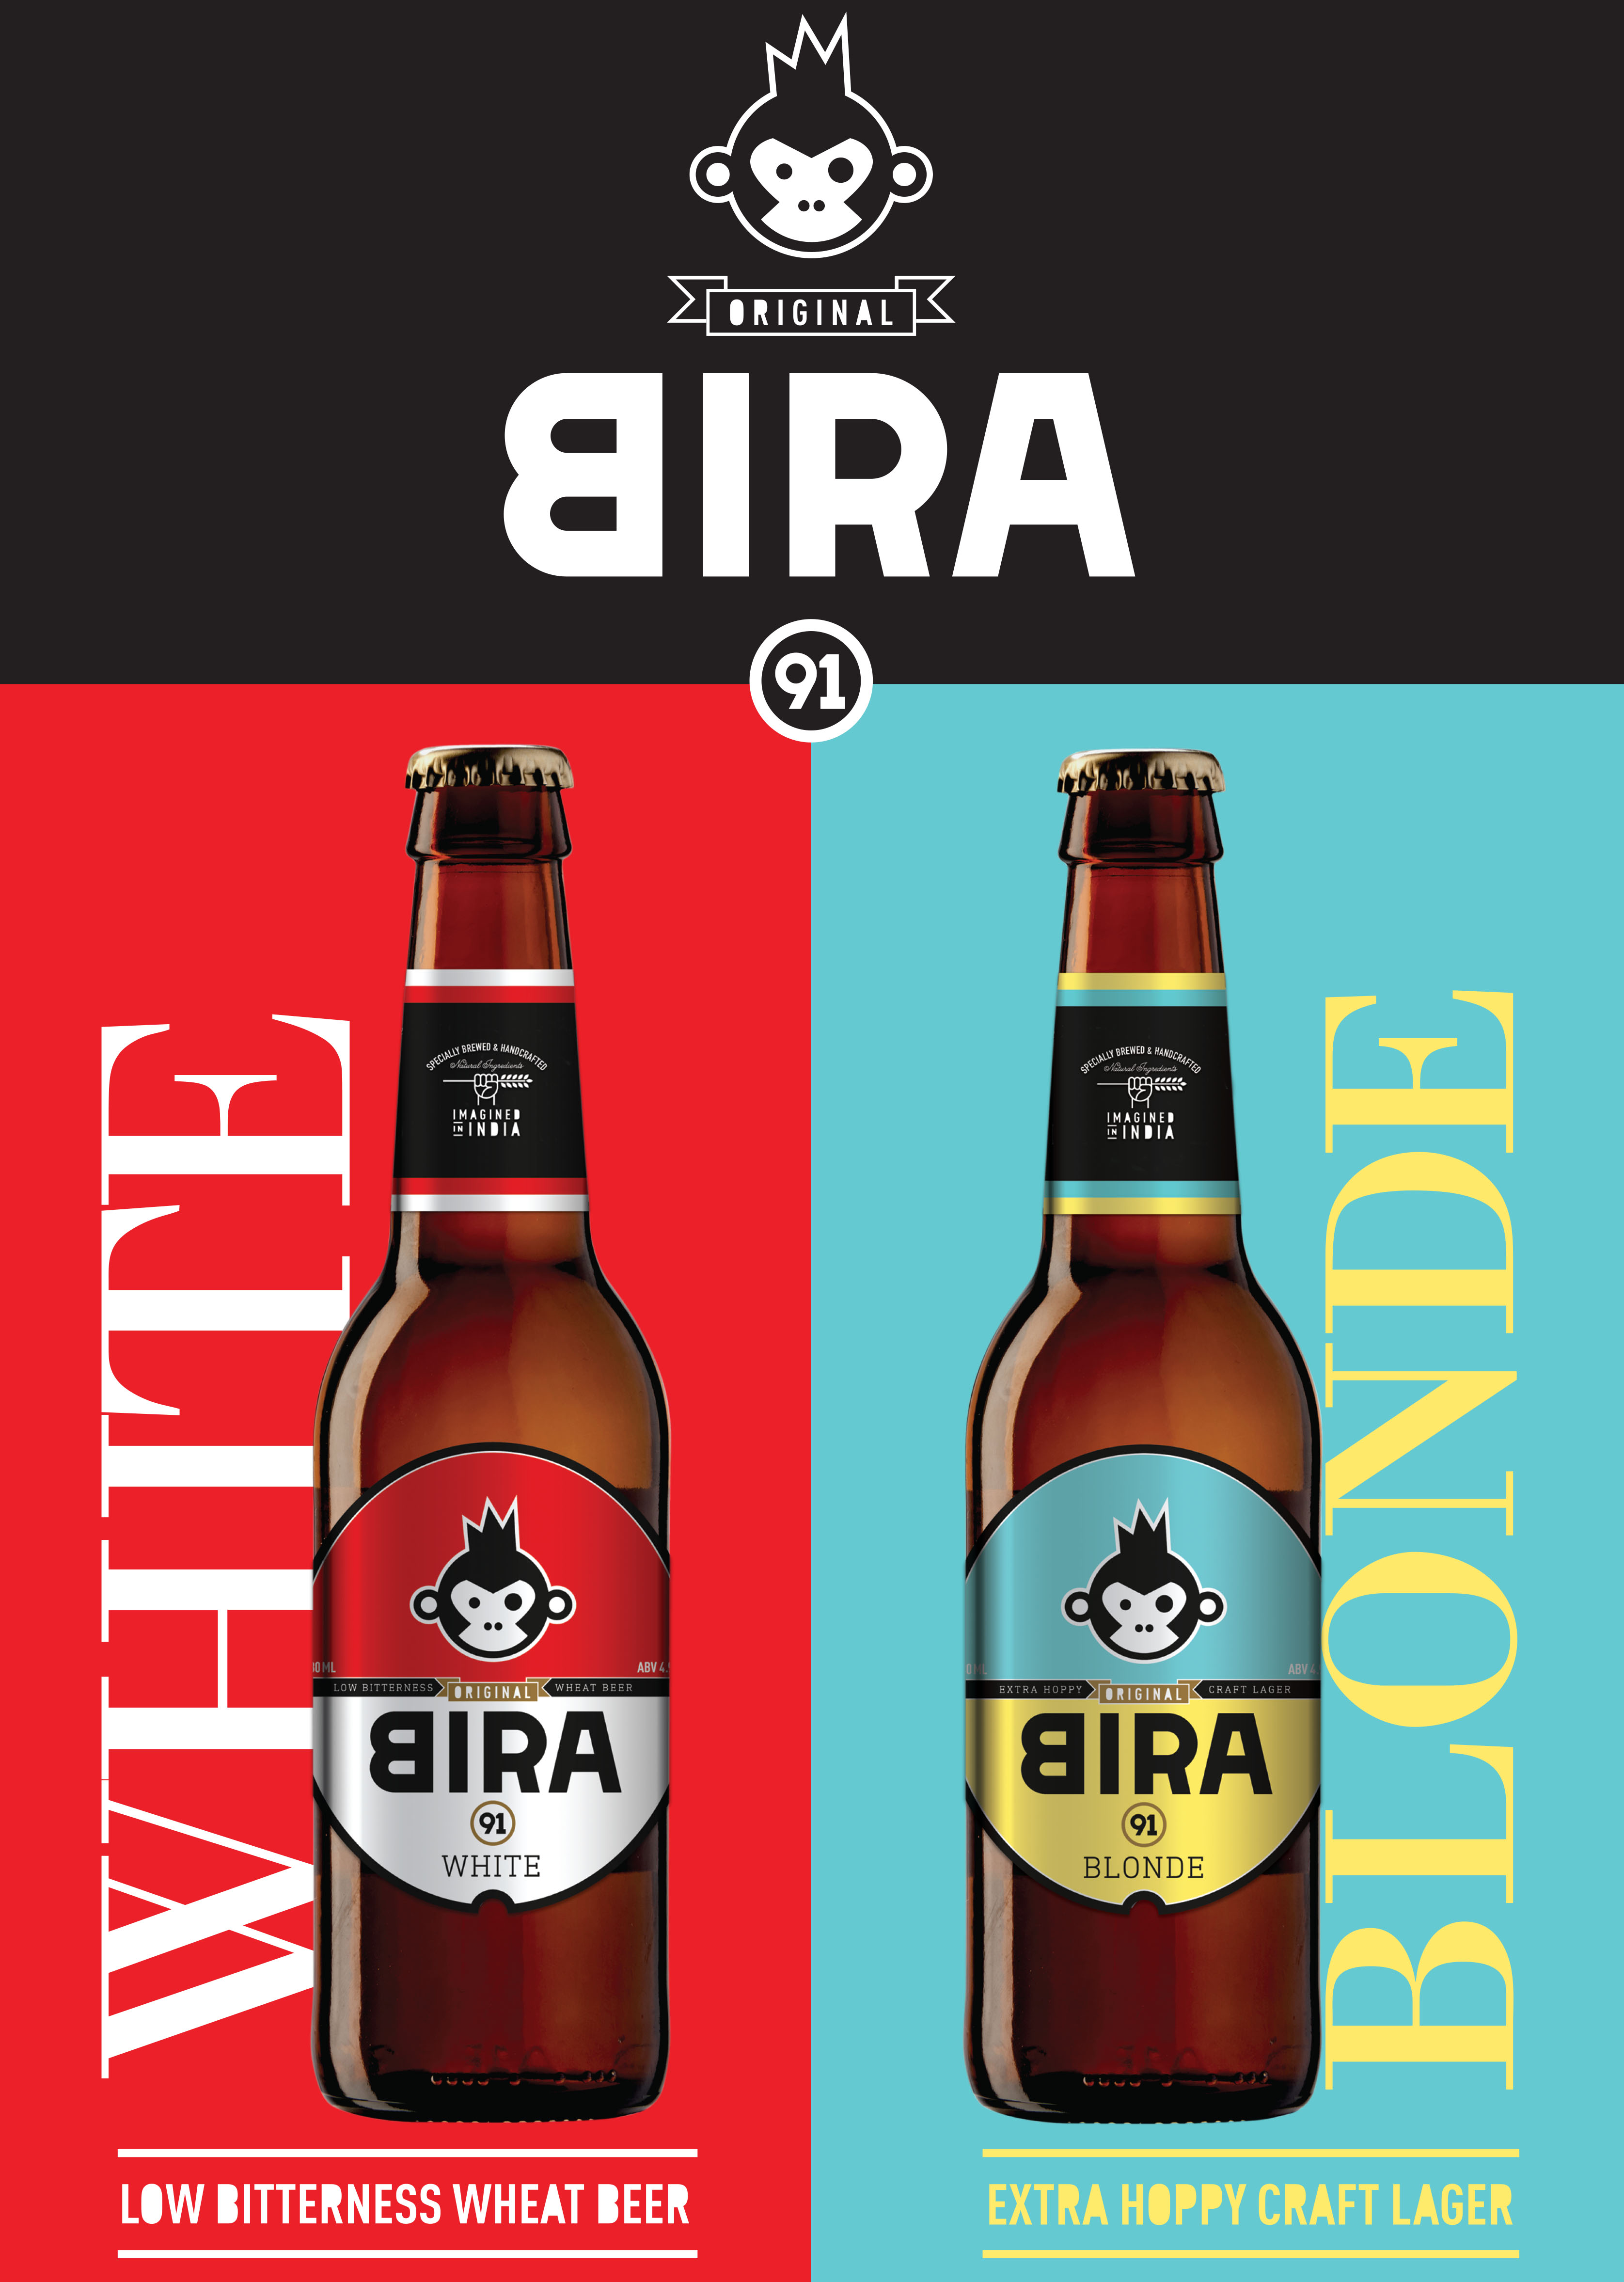 Indian craft beer Bira91 to be launched in Nepal soon